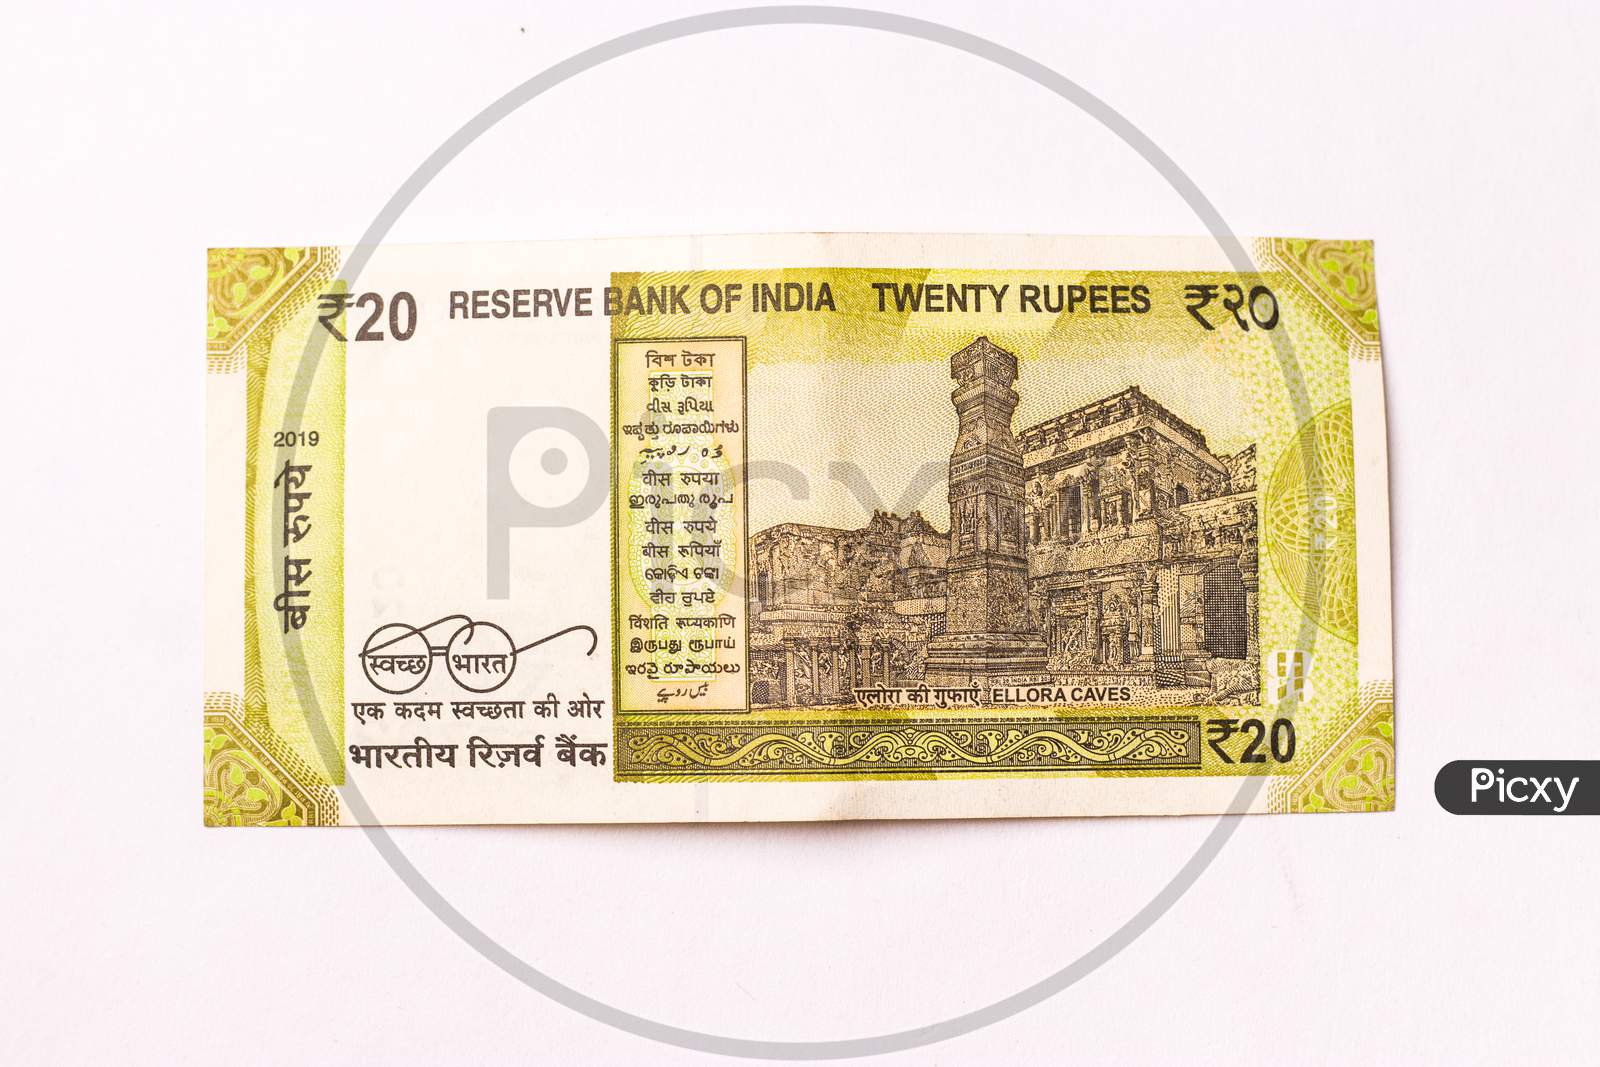 Assam, india - March 30, 2021 : Indian new 20 Rupees note stock image.